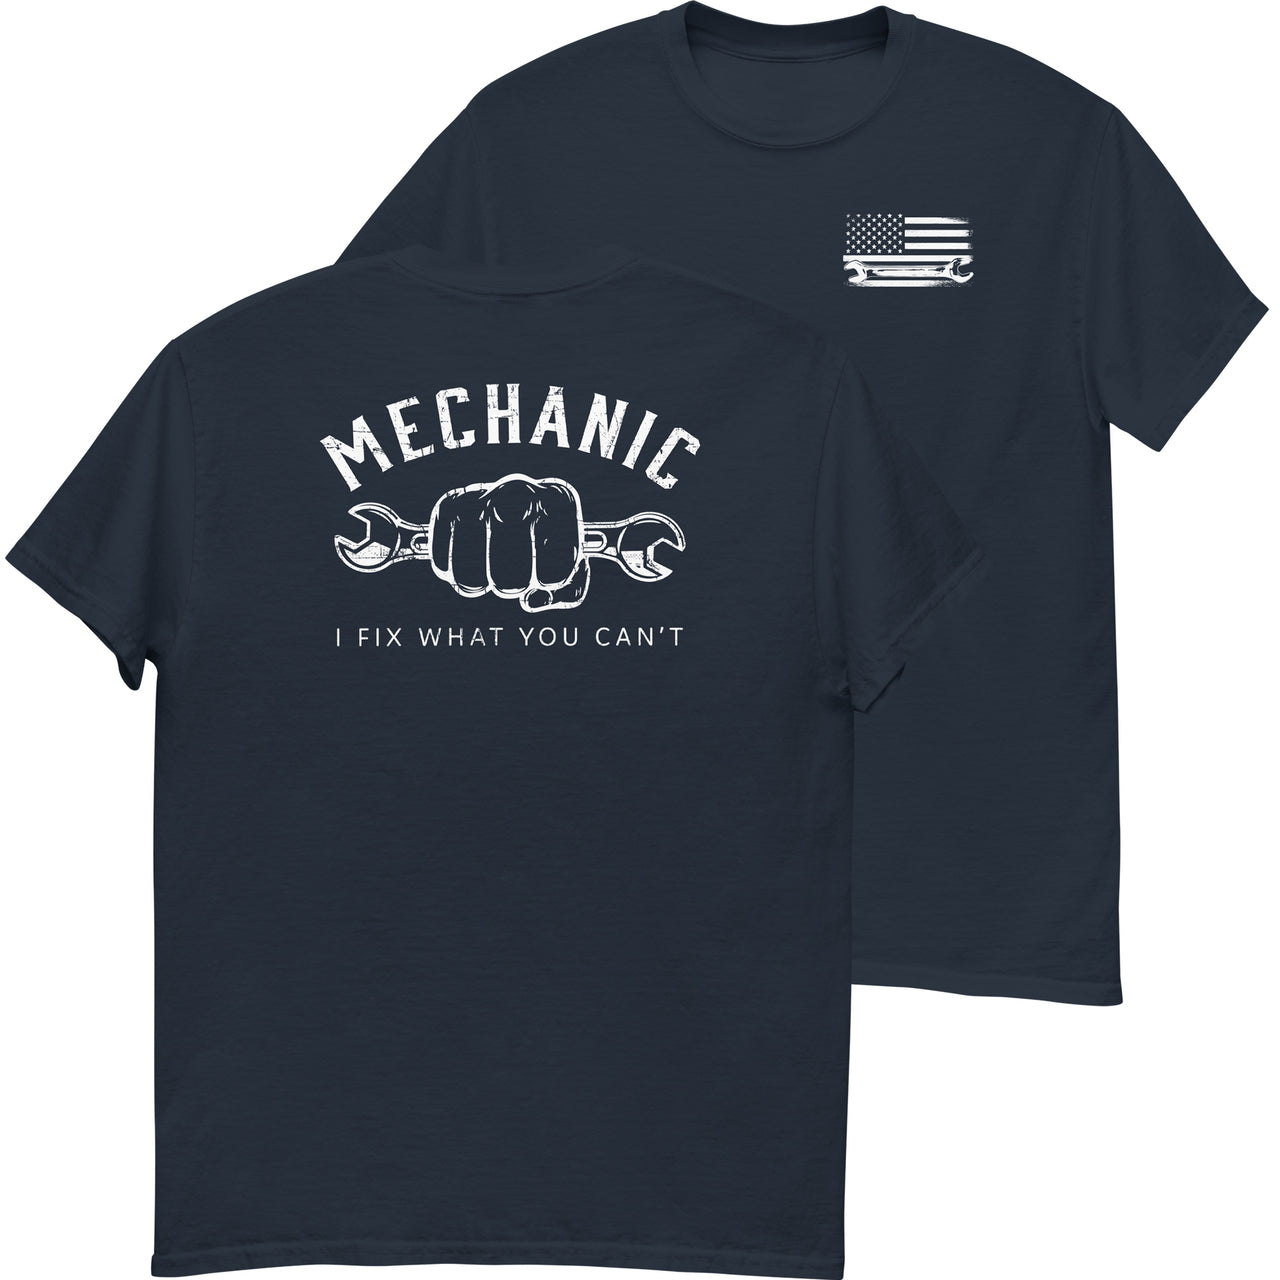 Mechanic T-Shirt - I Fix What You Cant in navy